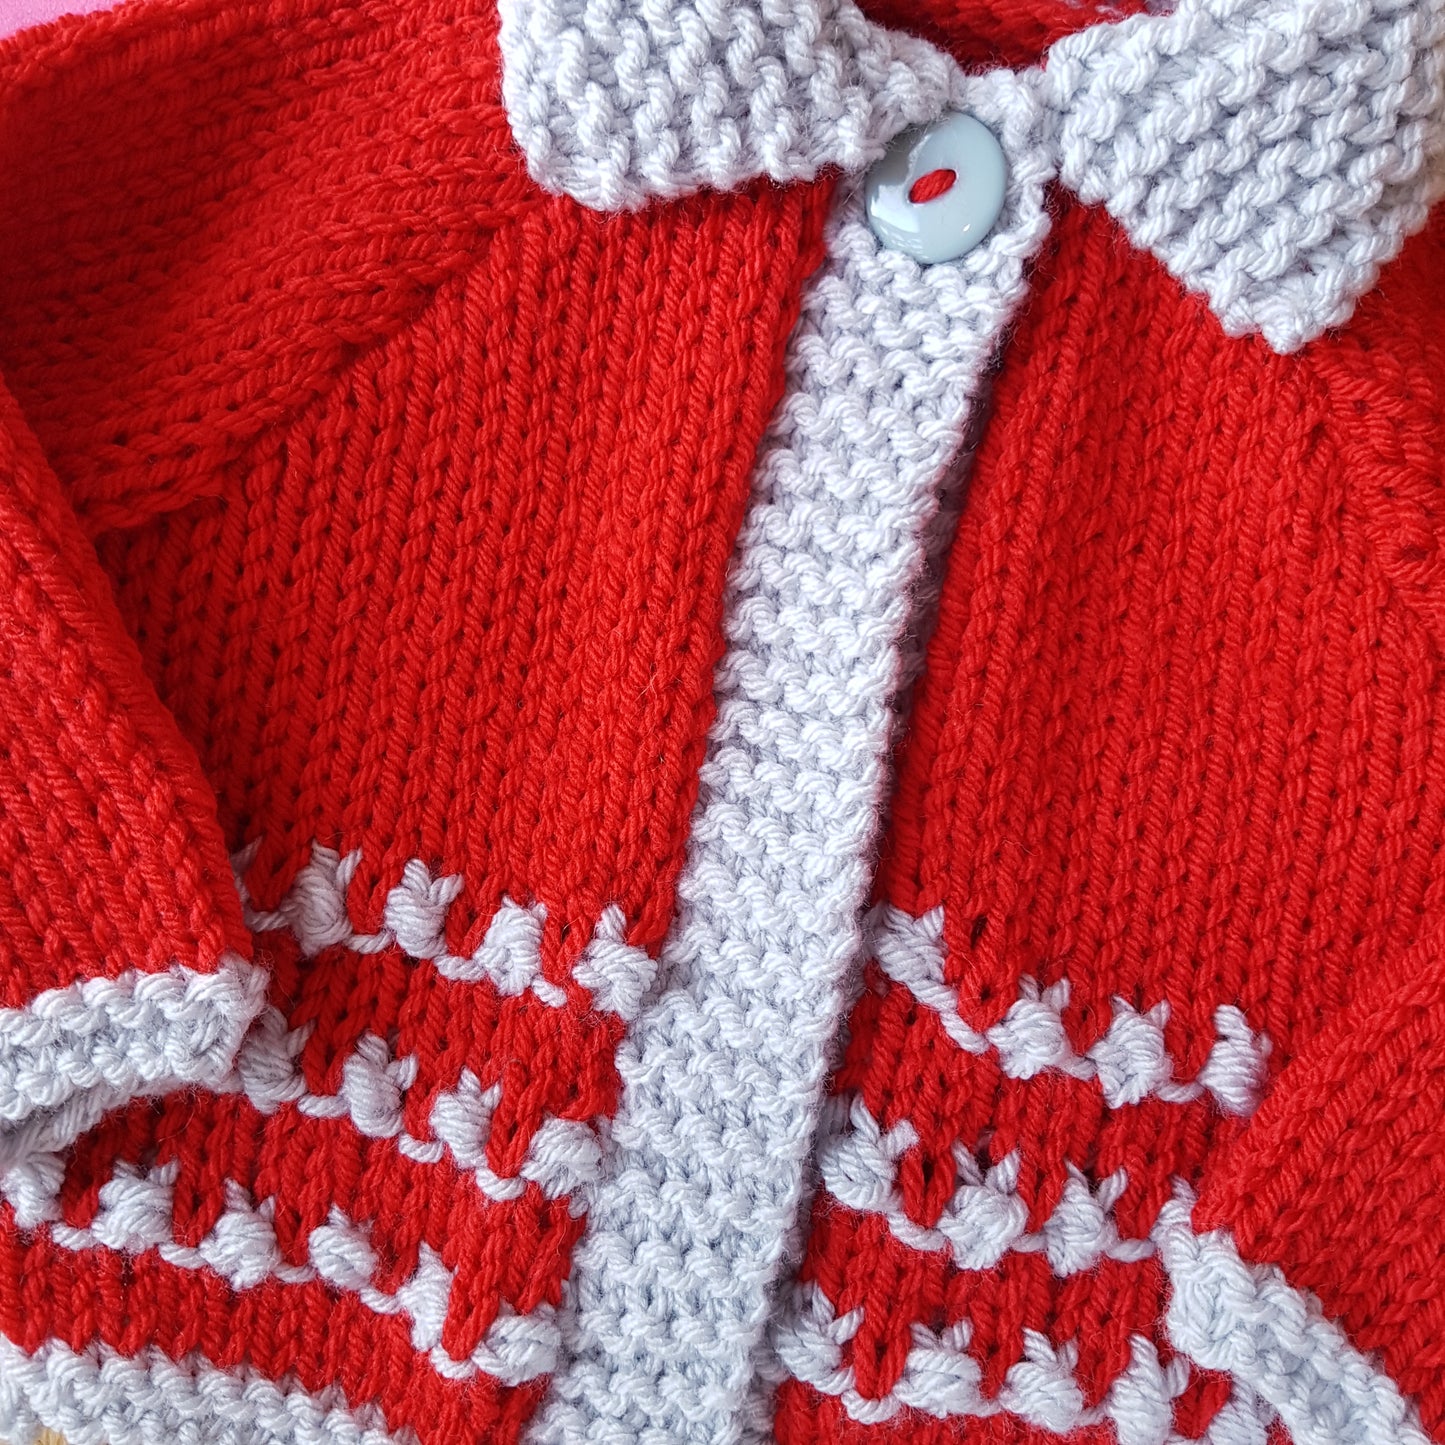 Red and Grey Knit Cardigans 6-12 months